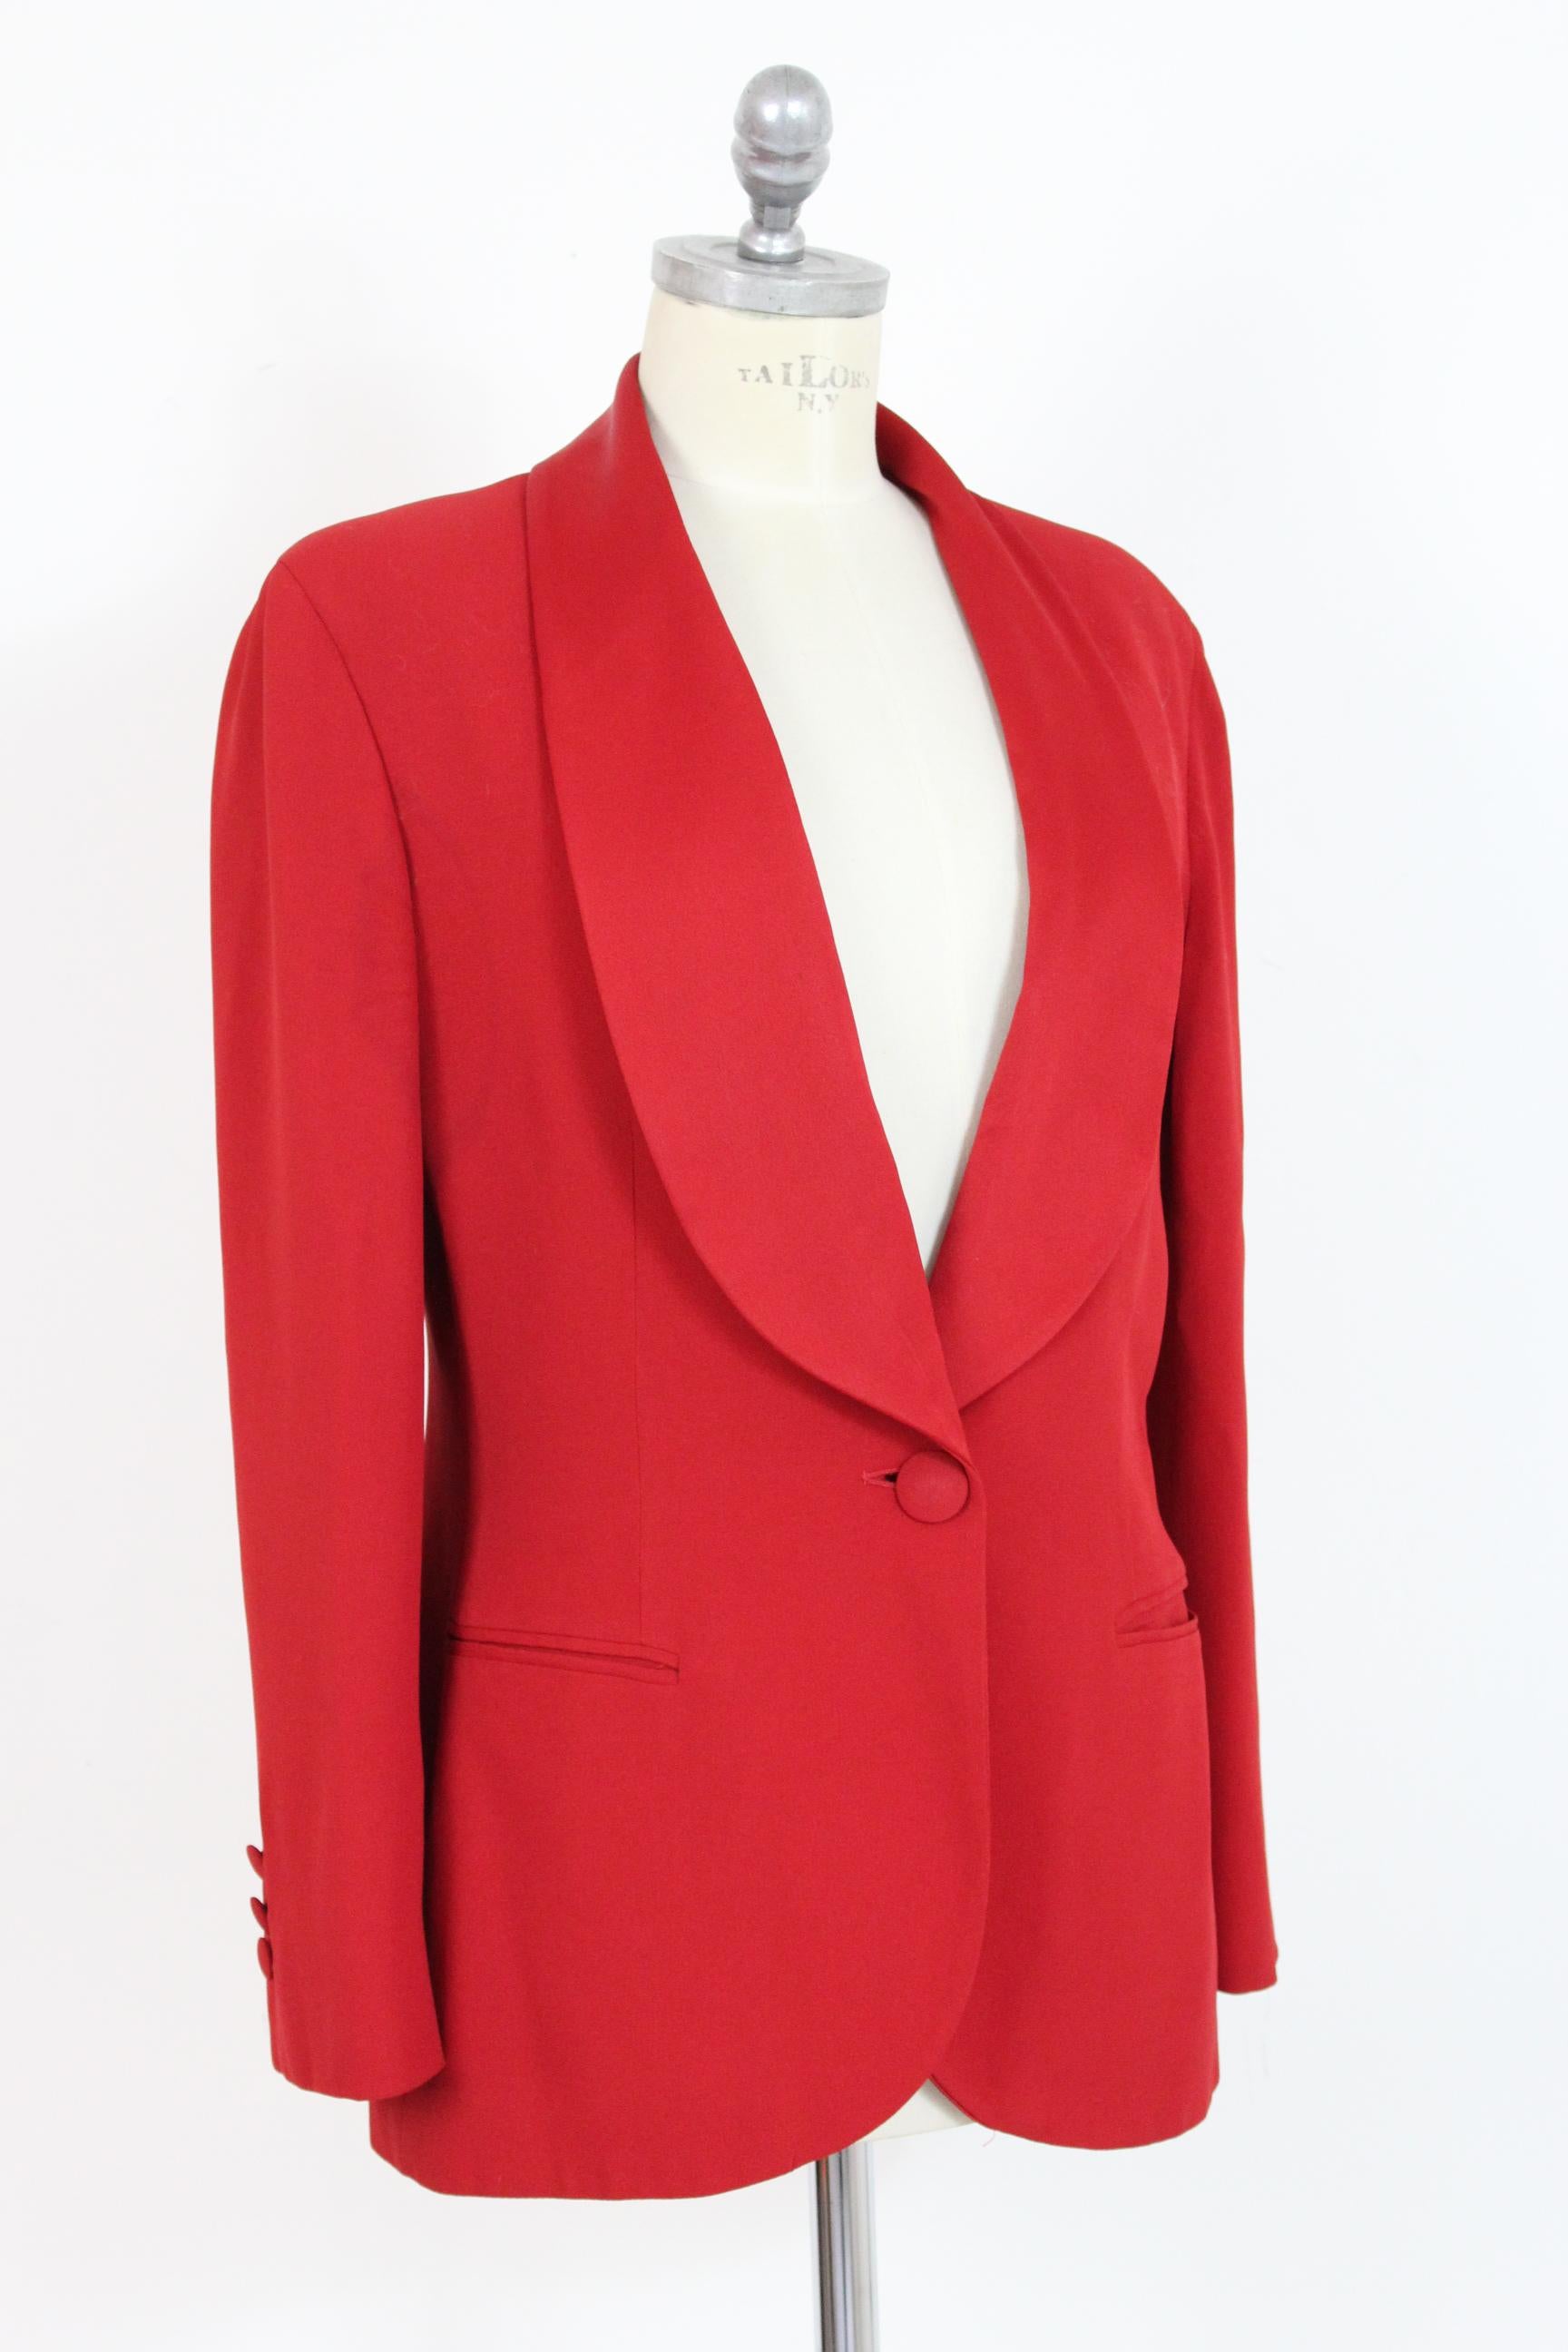 Women's Moschino Cheap And Chic Red Satin Flared Tuxedo Jacket 1990s